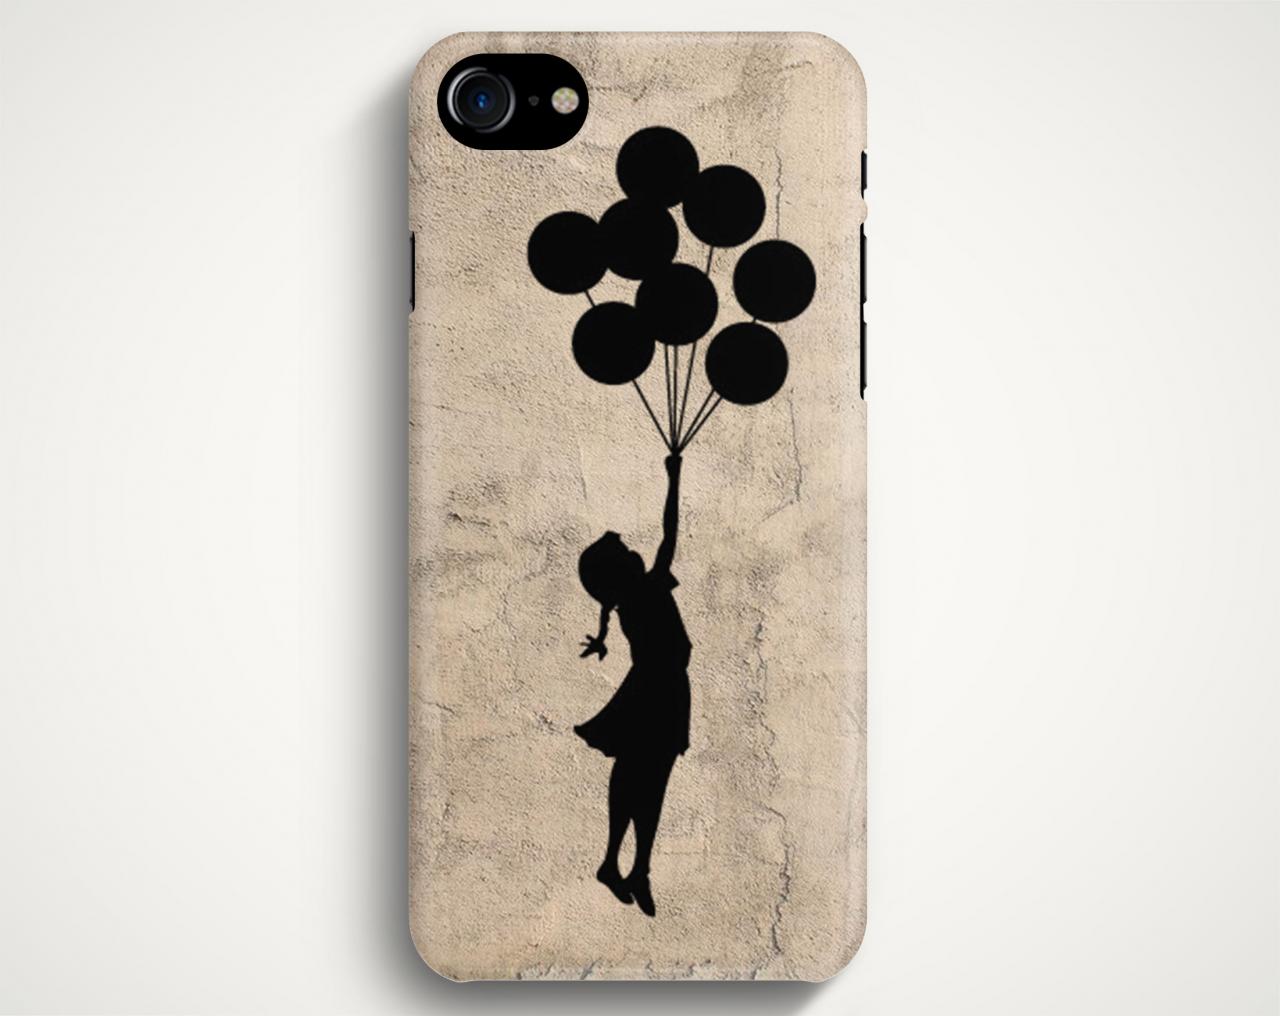 Girl With Balloons On Case For Iphone 7 Iphone 7 Plus Samsung Galaxy S8 Galaxy S7 Galaxy A3 Galaxy A5 Galaxy A7 Lg G6 Lg G5 Htc 10